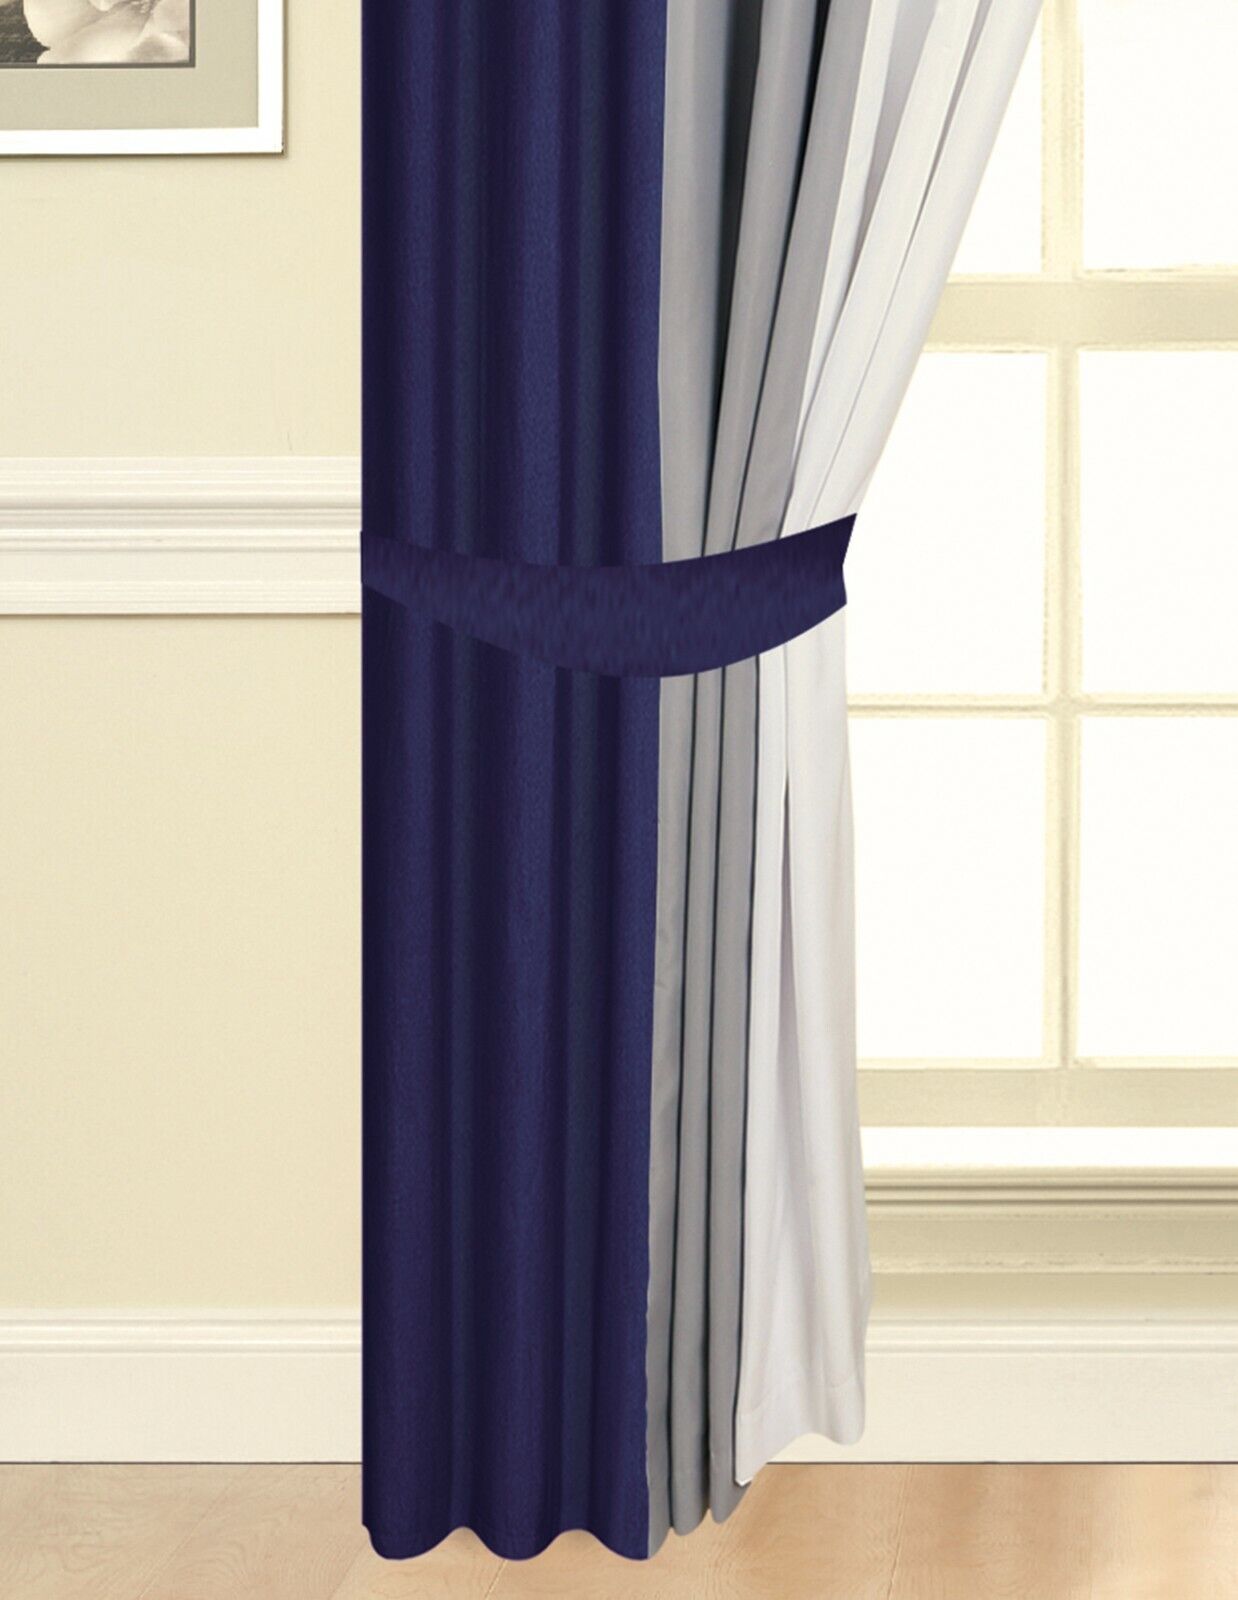 Eyelet curtains Navy Blue Ring Top Fully Lined Pair of curtains 3 Tone Navy Grey White tie backs